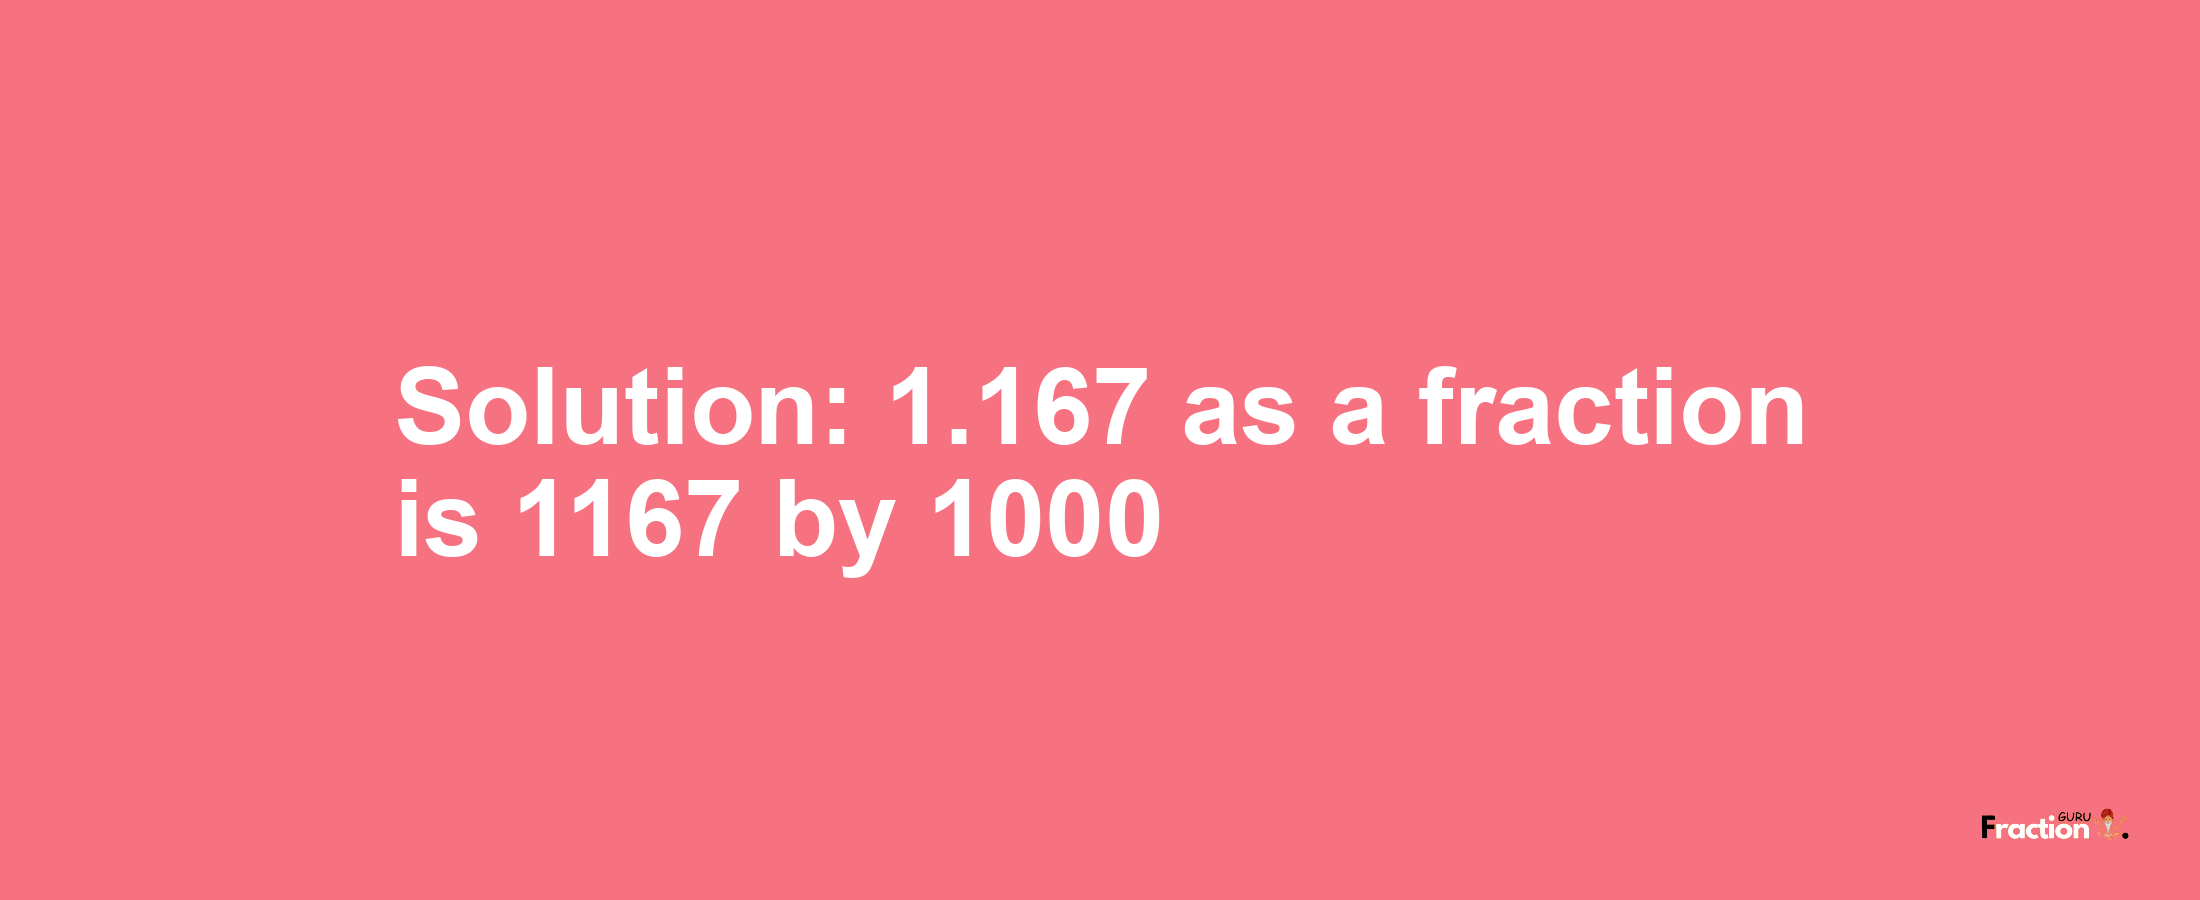 Solution:1.167 as a fraction is 1167/1000